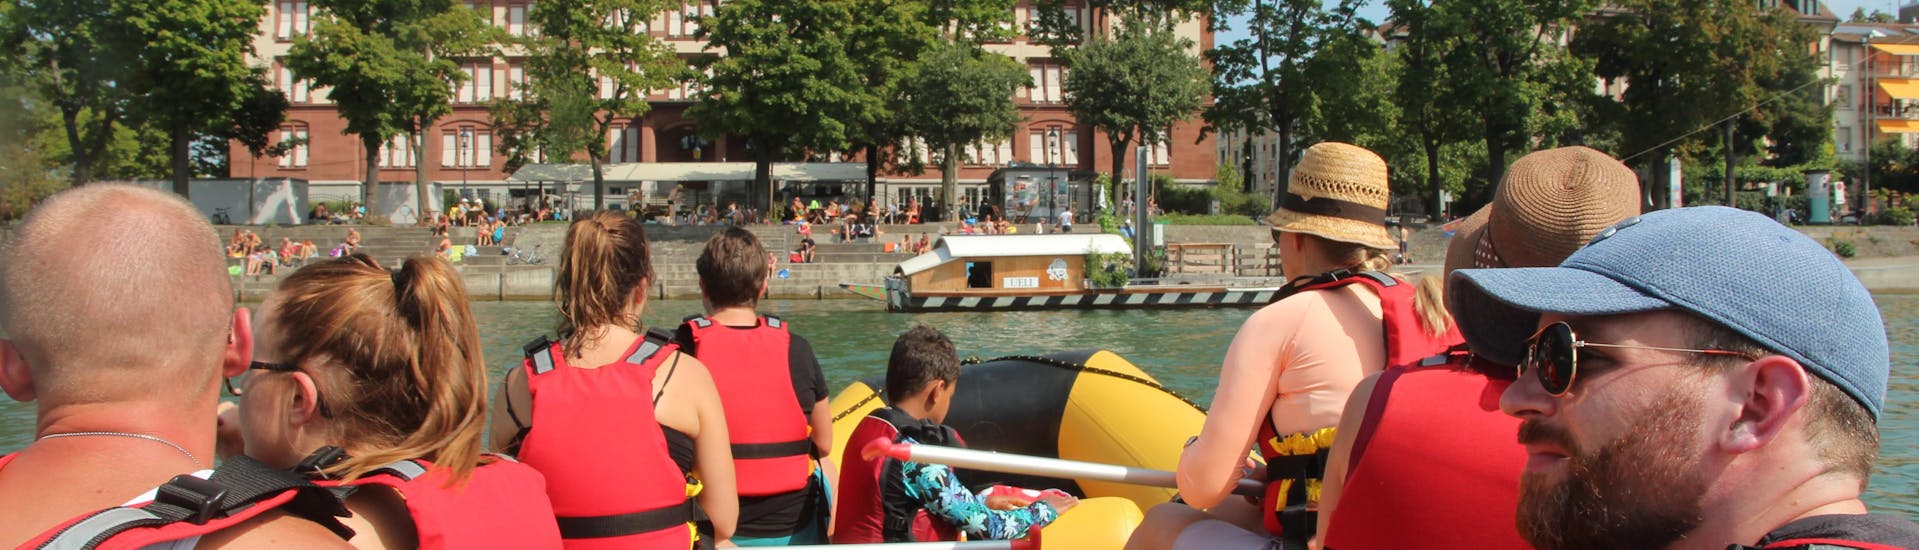 People admiring the city during Soft Rafting on the Rhine - Citytour Basel with Rheinraft